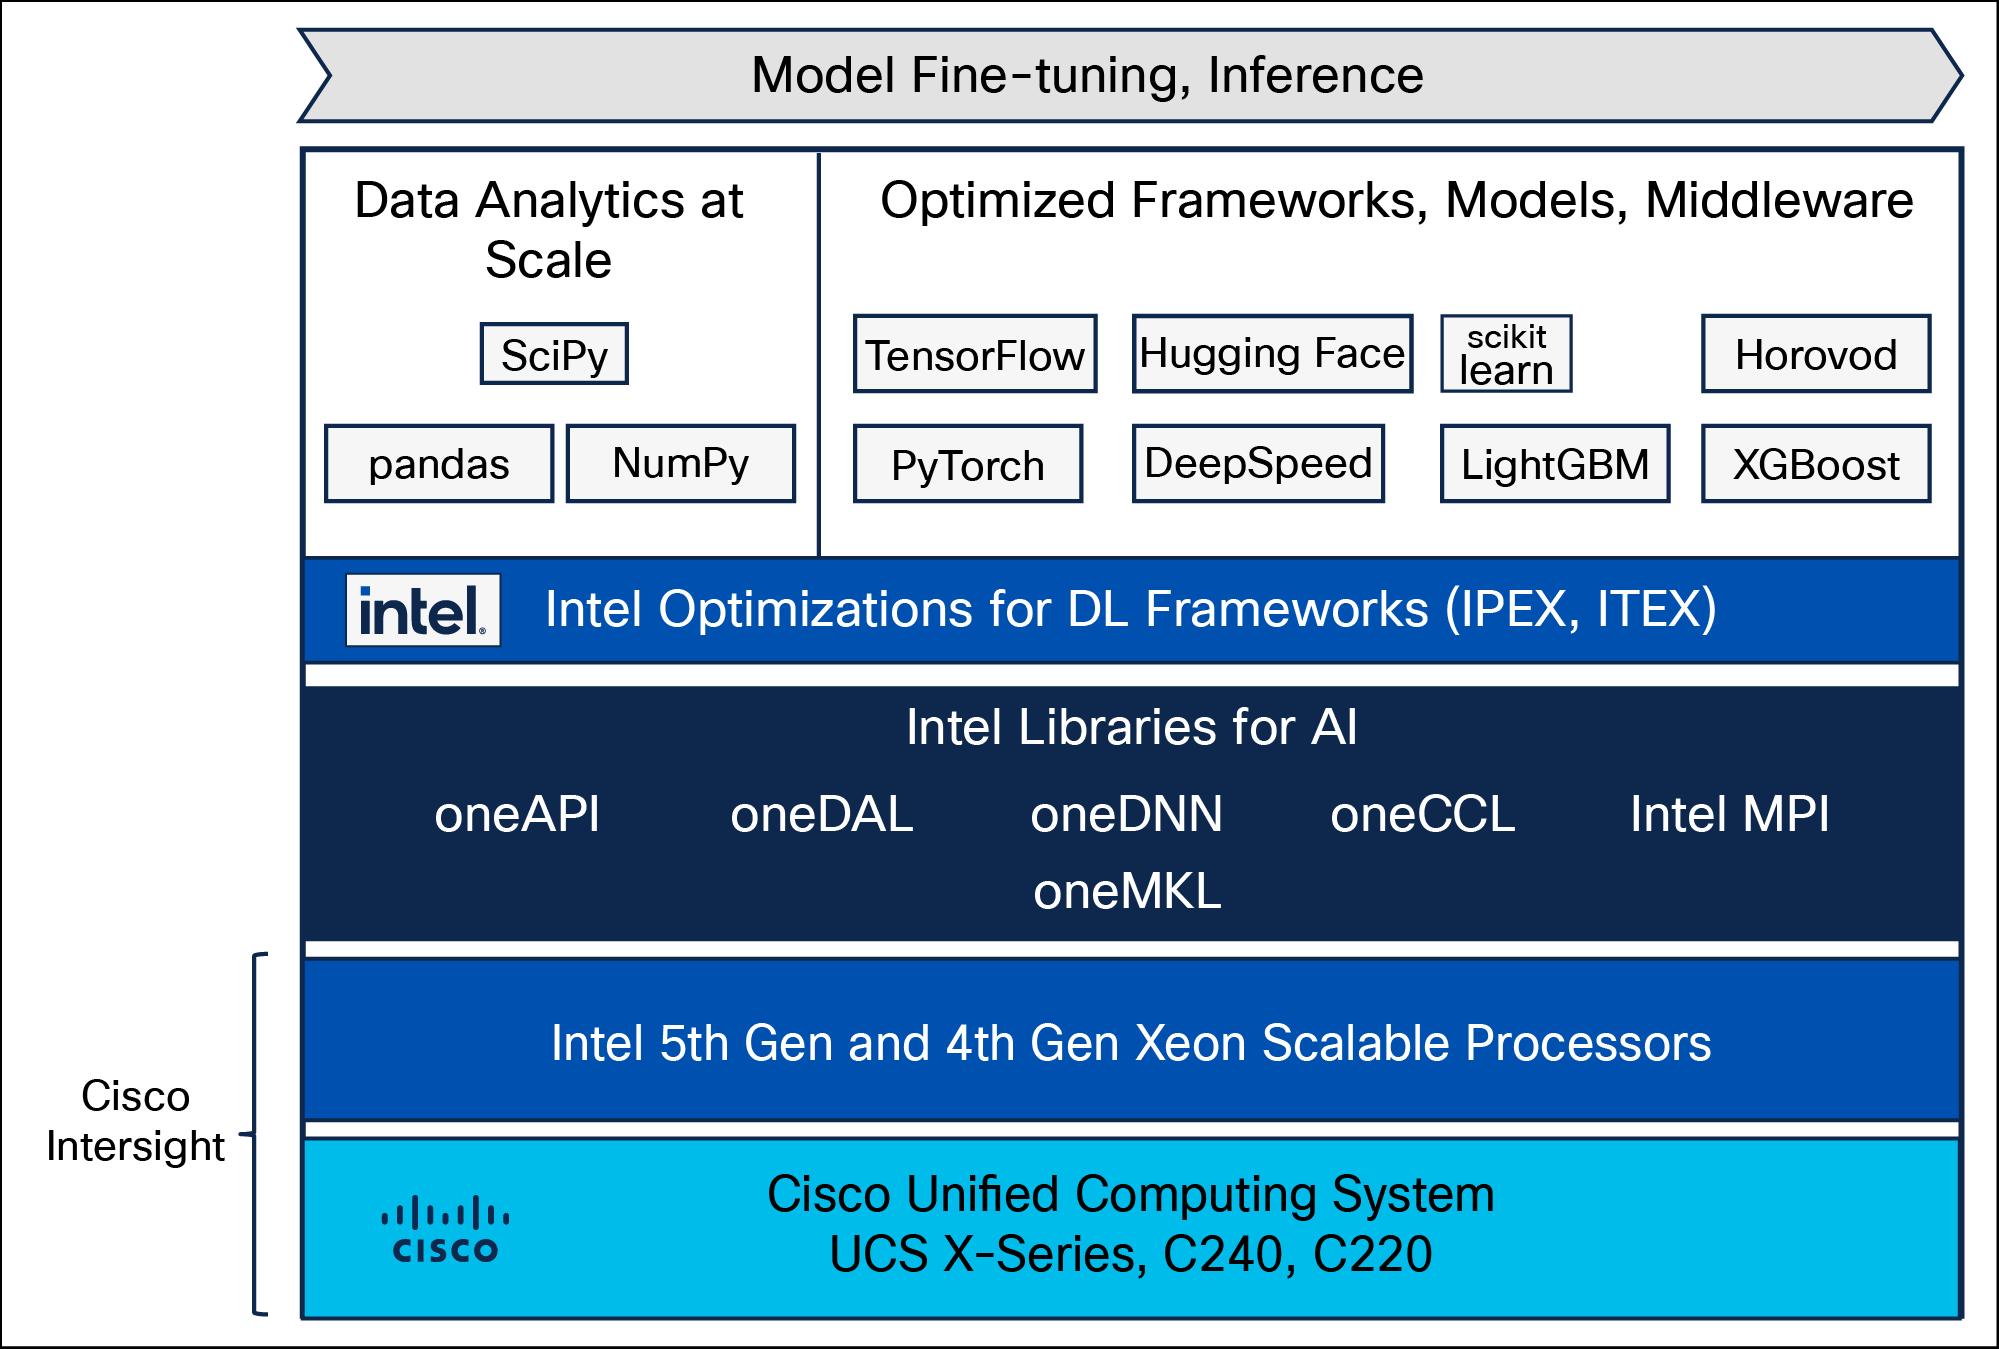 Reference architecture for deploying Generative AI on Cisco UCS with 5th Gen and 4th Gen Intel Xeon Scalable Processors